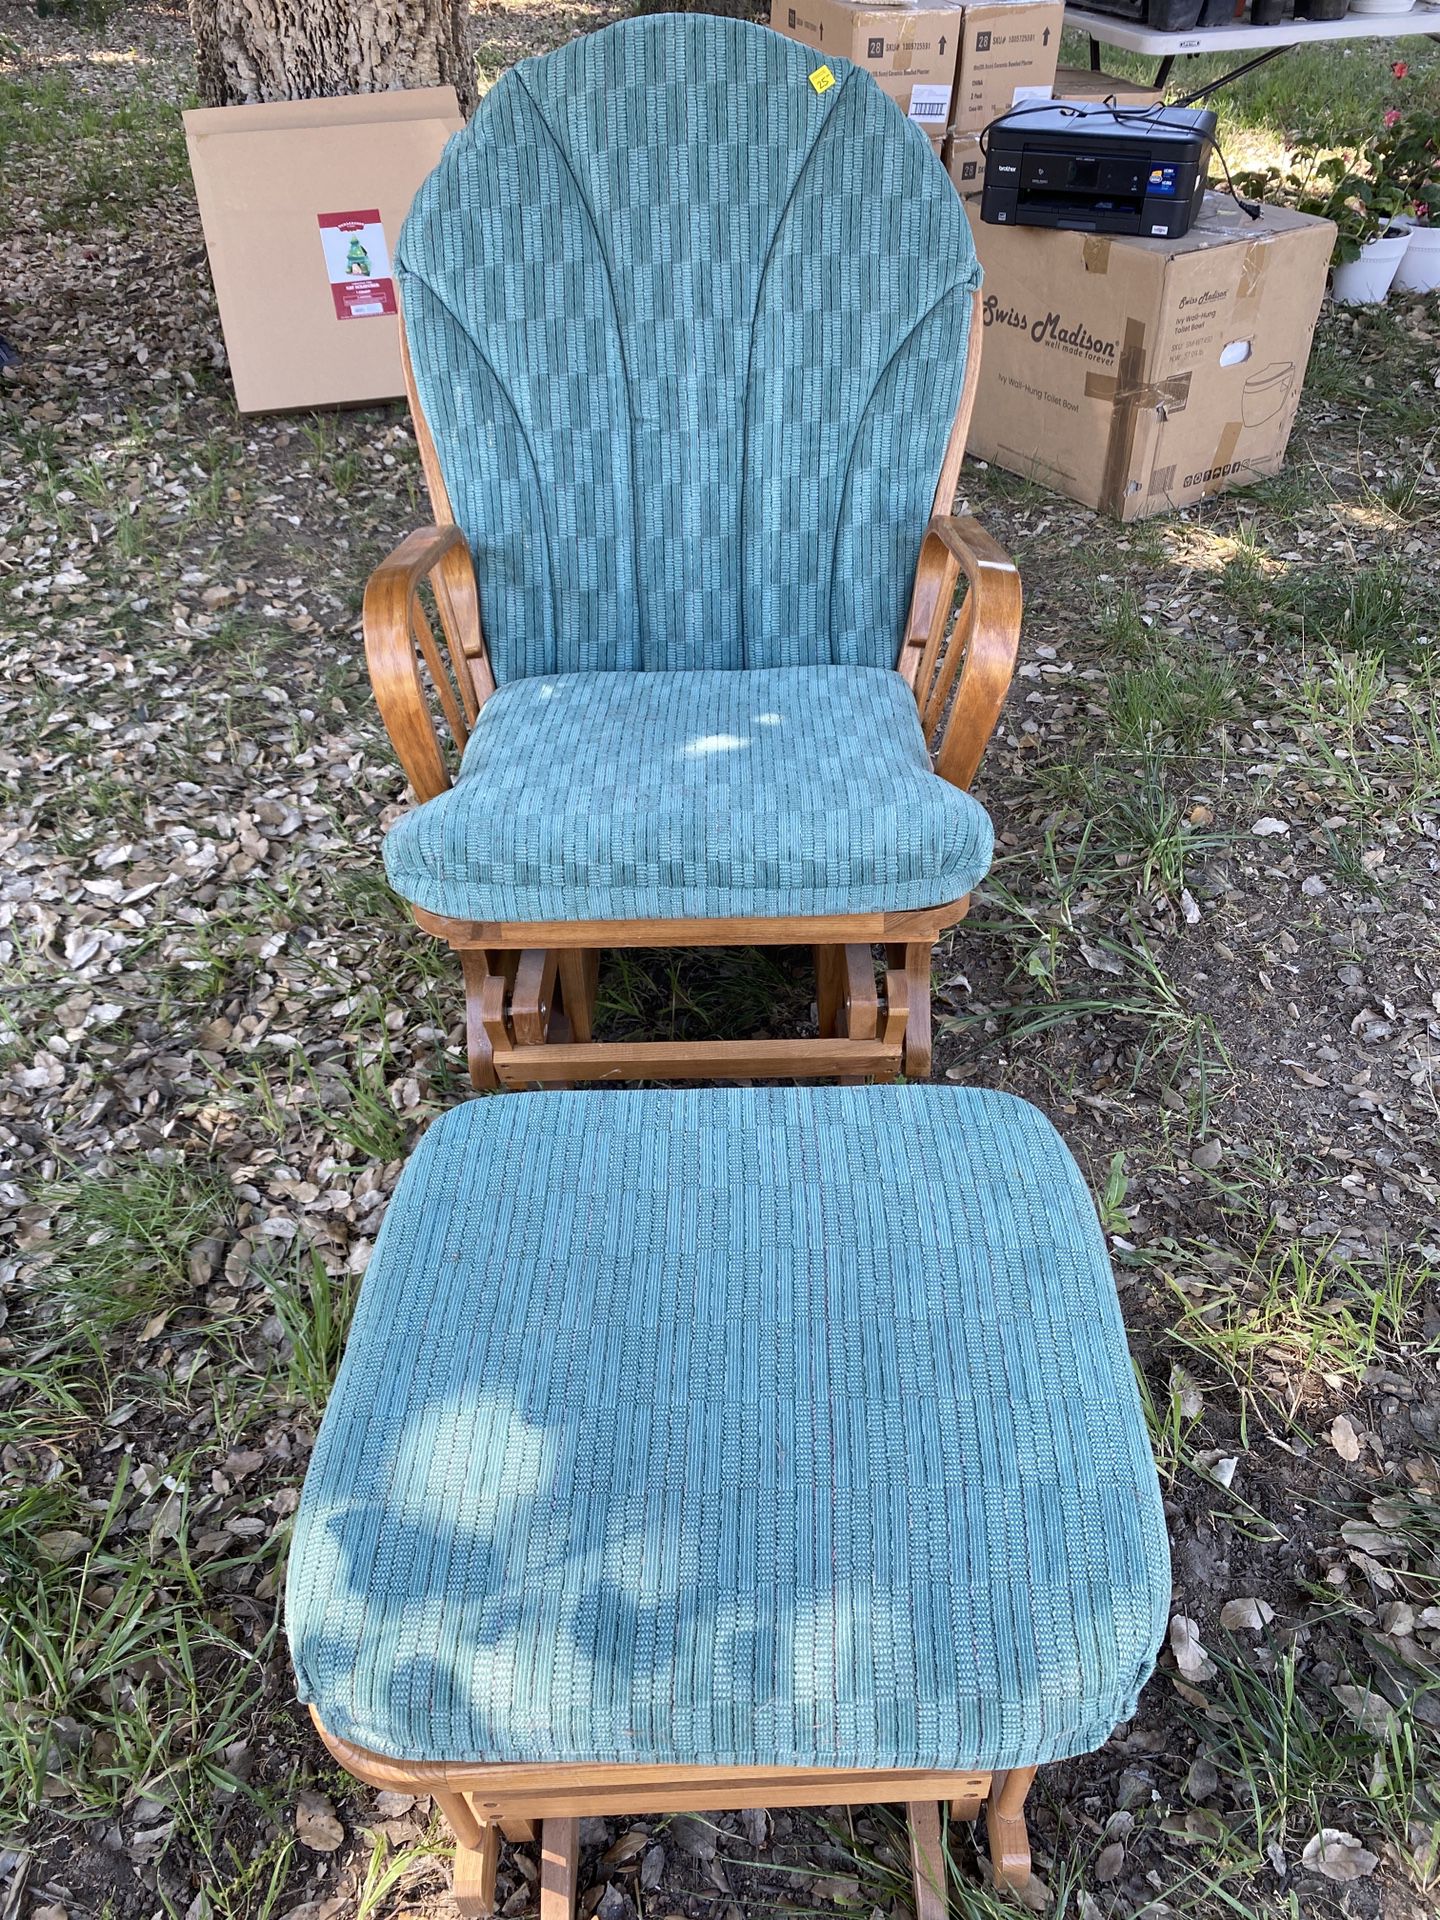 Rocking Chair with Ottoman 